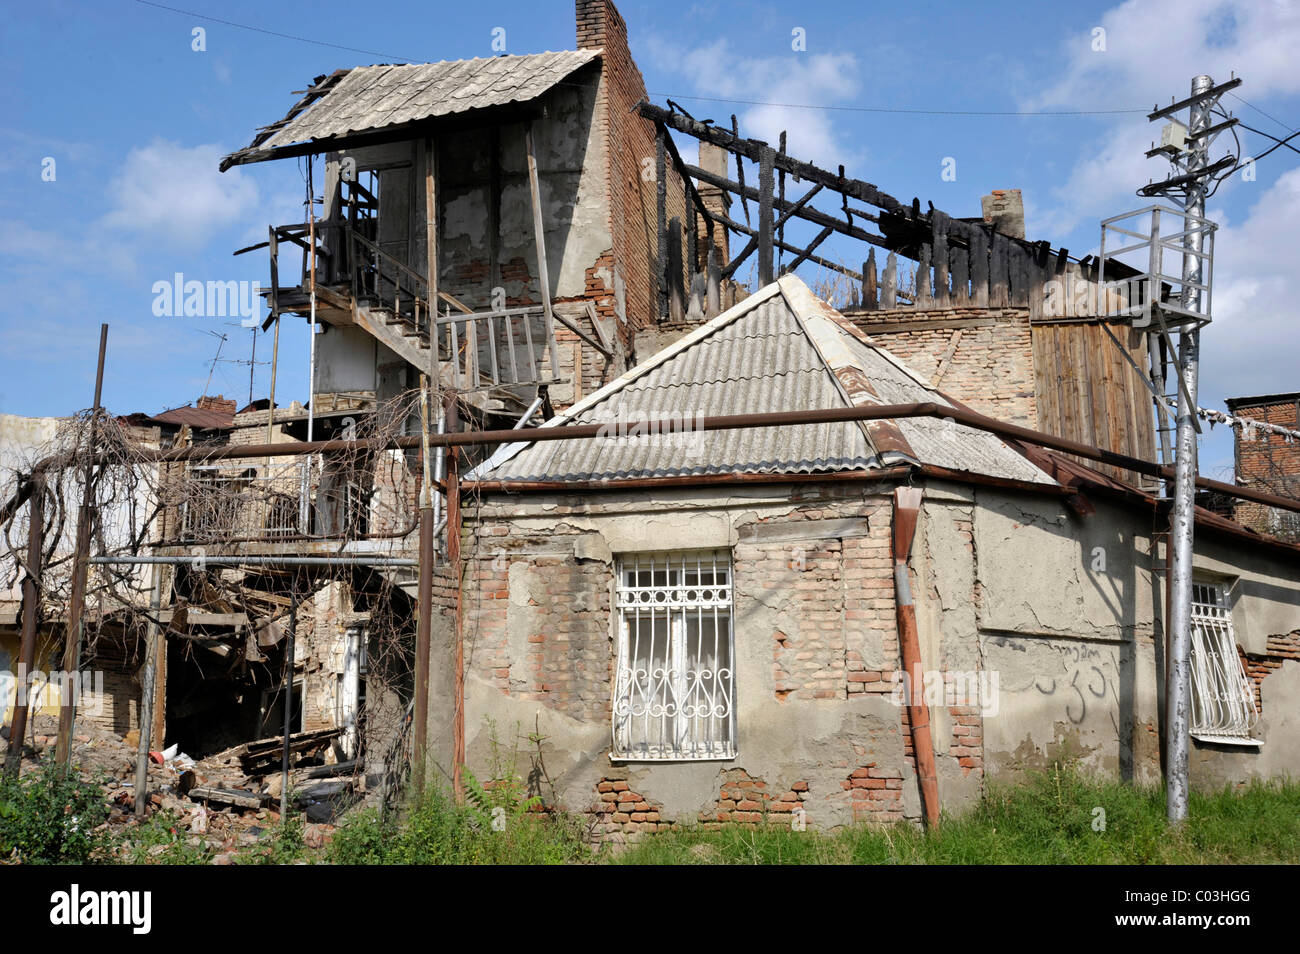 Old house after a fire, Avlabari district, Tbilisi, Georgia, Western Asia Stock Photo